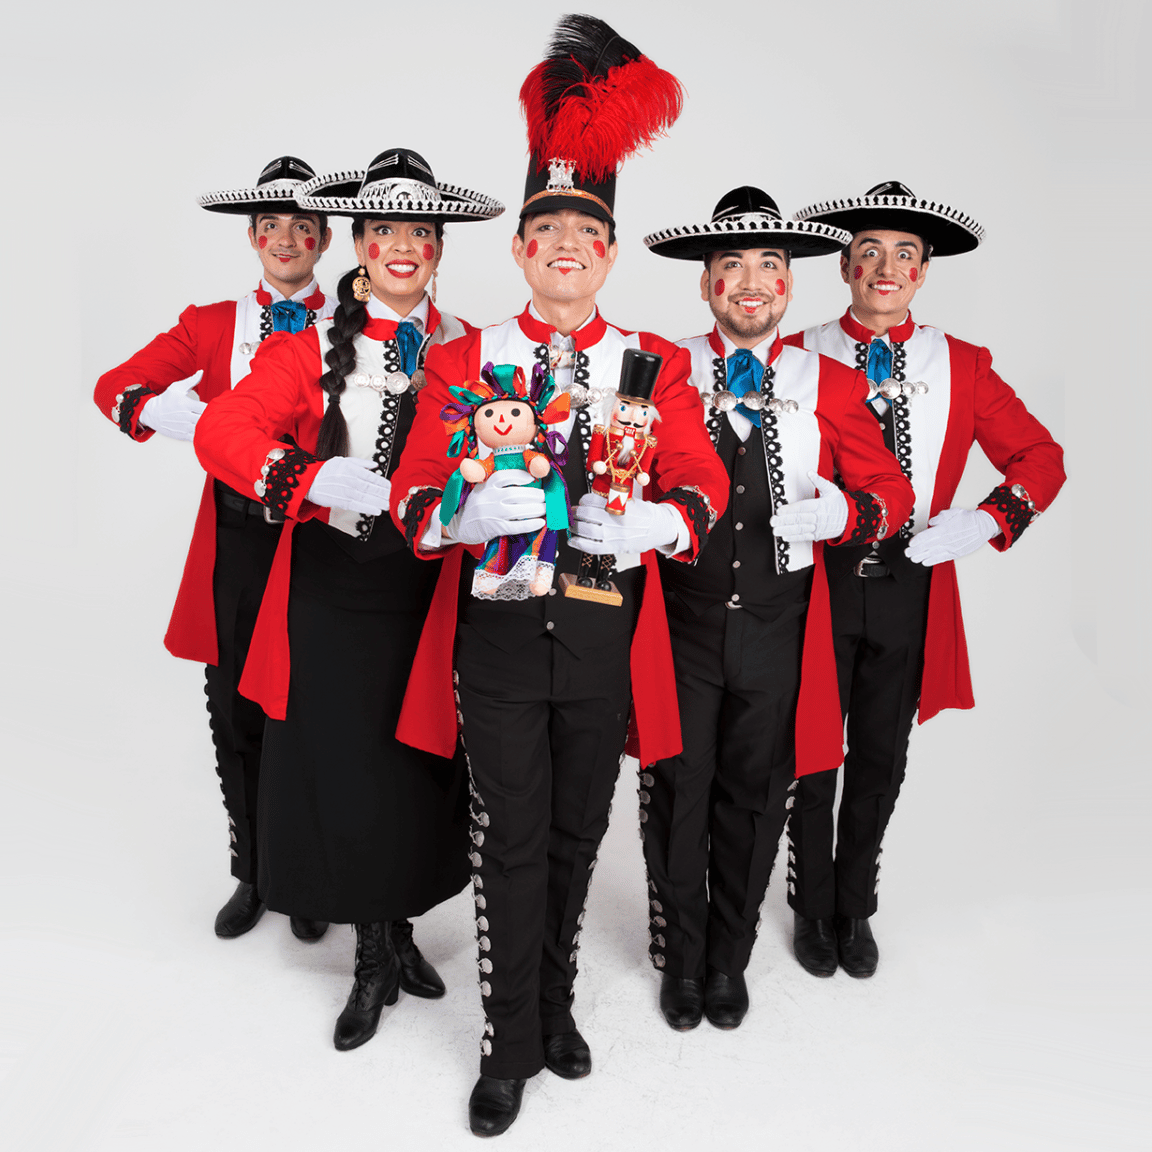 Five dancers dressed as Mexican-style nutcrackers against a white background